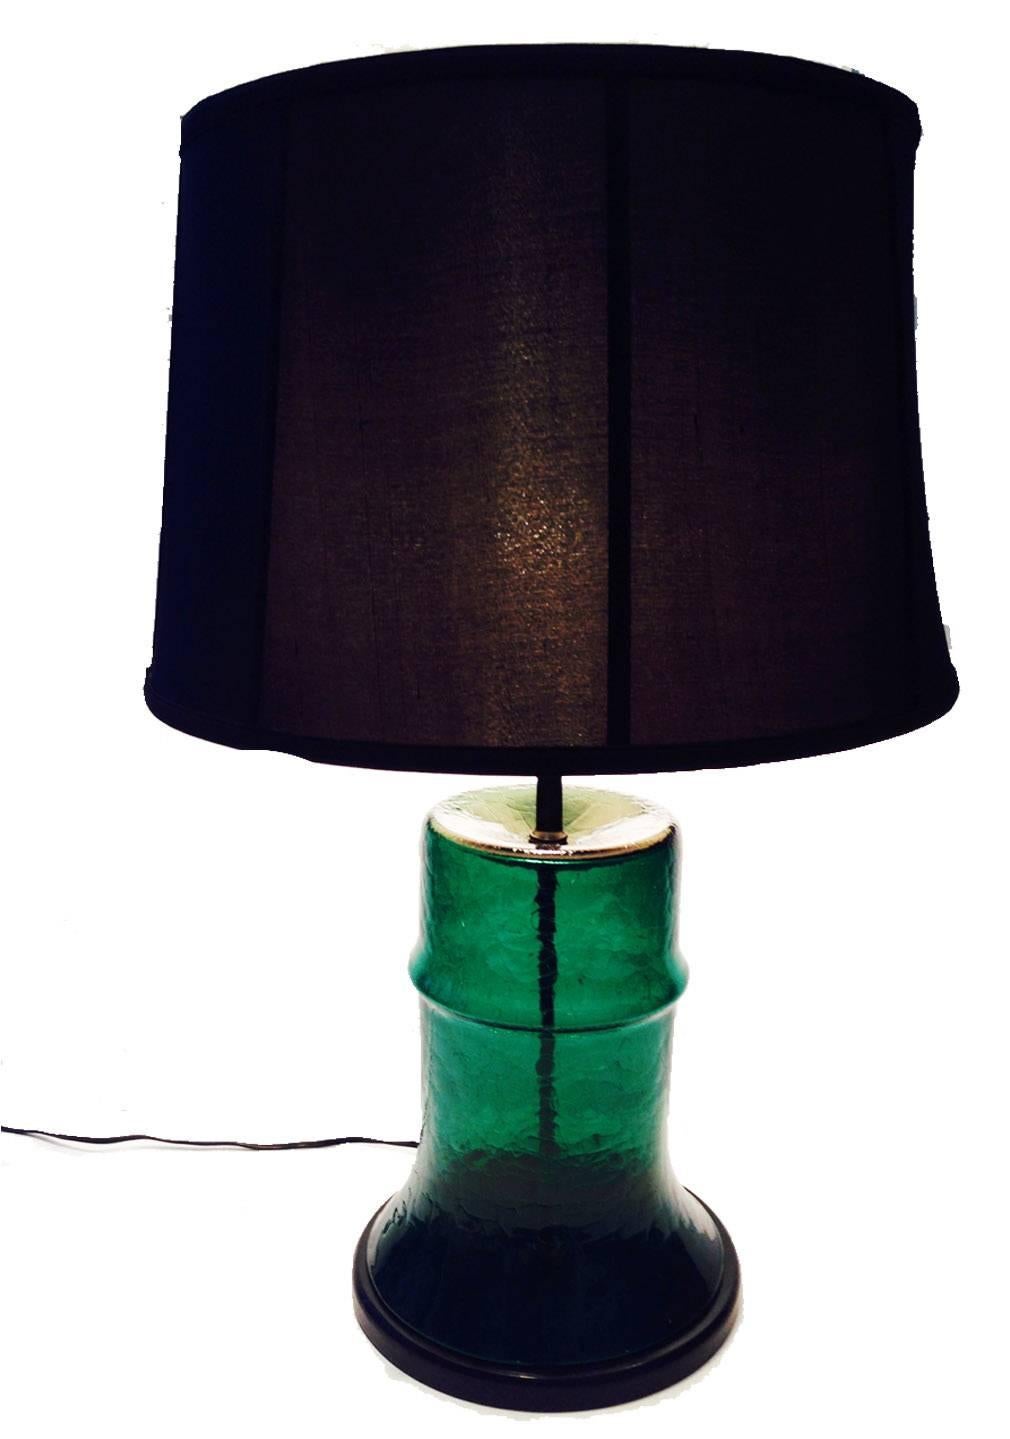 Rare Blenko Glass Co. emerald green handblown barrel shaped lamp. Original brass fittings, black wood base. Shade not included. Wired for the US and in working order.